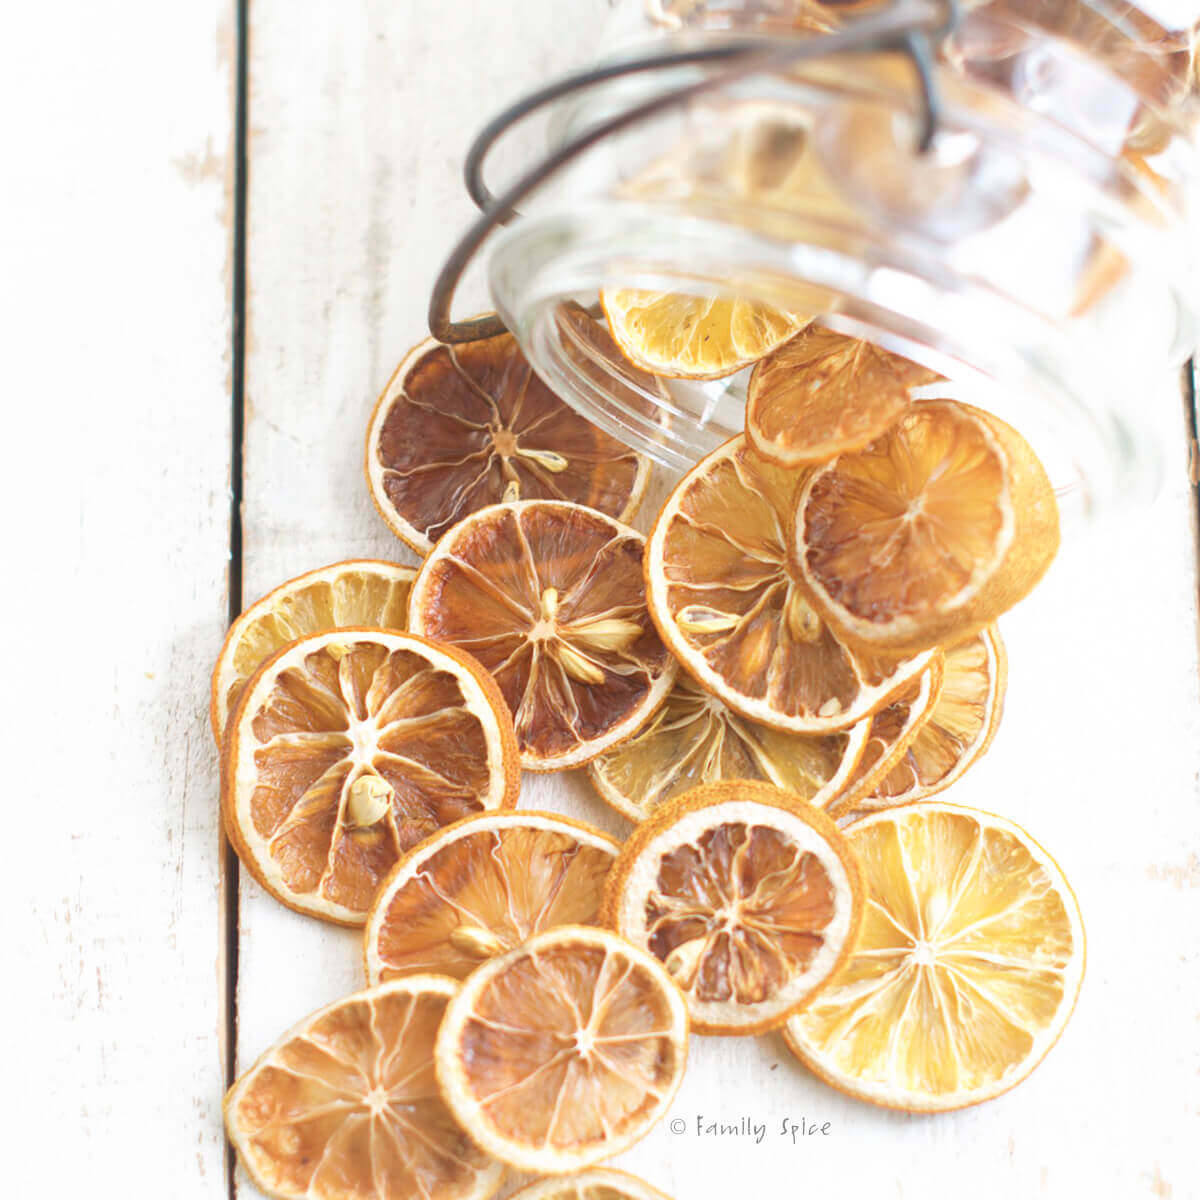 How to Make Dried Citrus